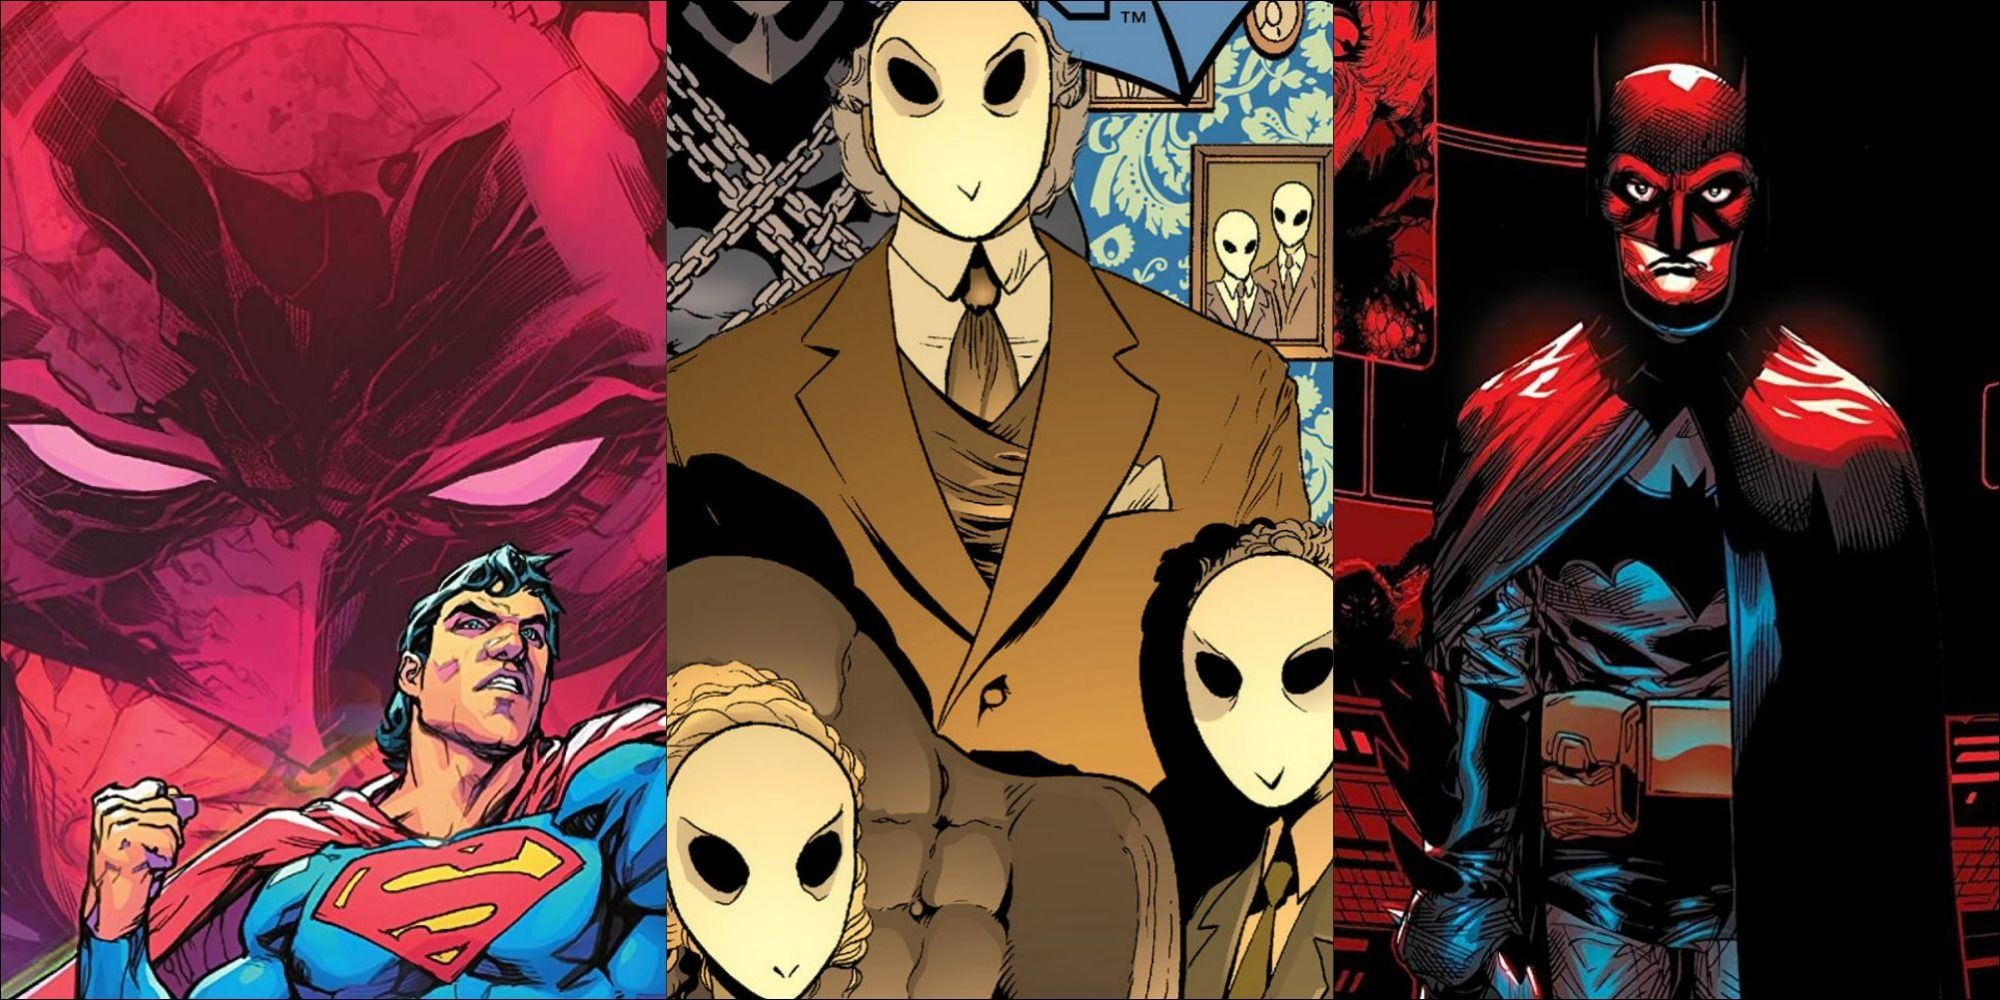 Three comic book covers featuring Batman, the World's Greatest Detective